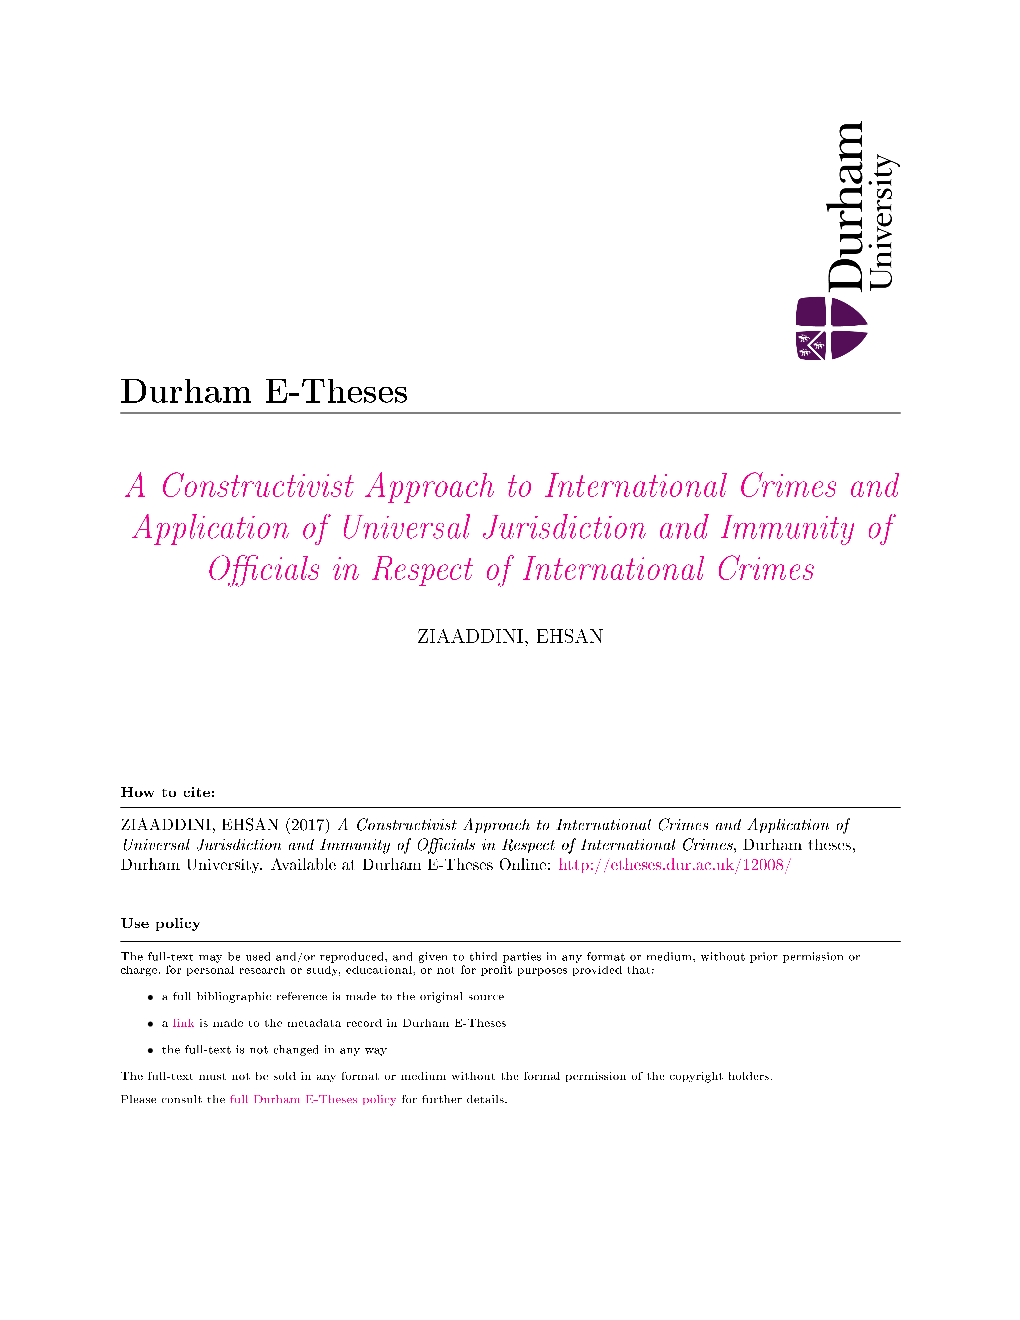 Universal Jurisdiction and International Crimes and Their Interrelated Operations